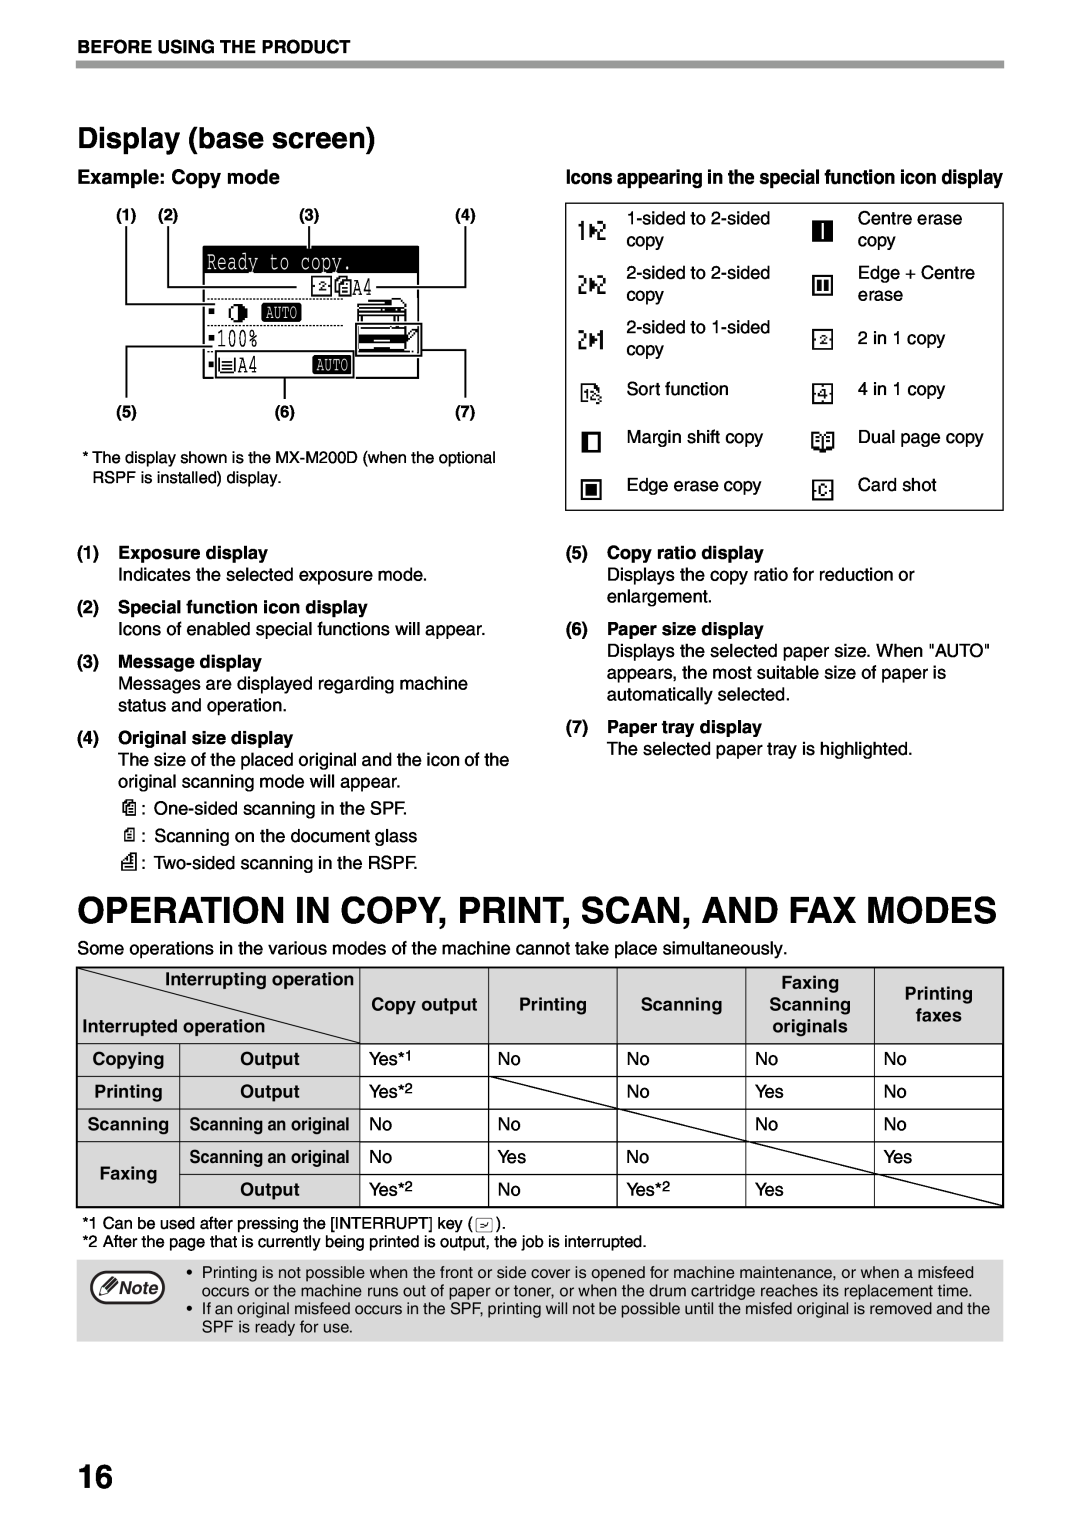 Sharp MX-M160D Operation In Copy, Print, Scan, And Fax Modes, Display base screen, copy, Example Copy mode, Ready, 100% 